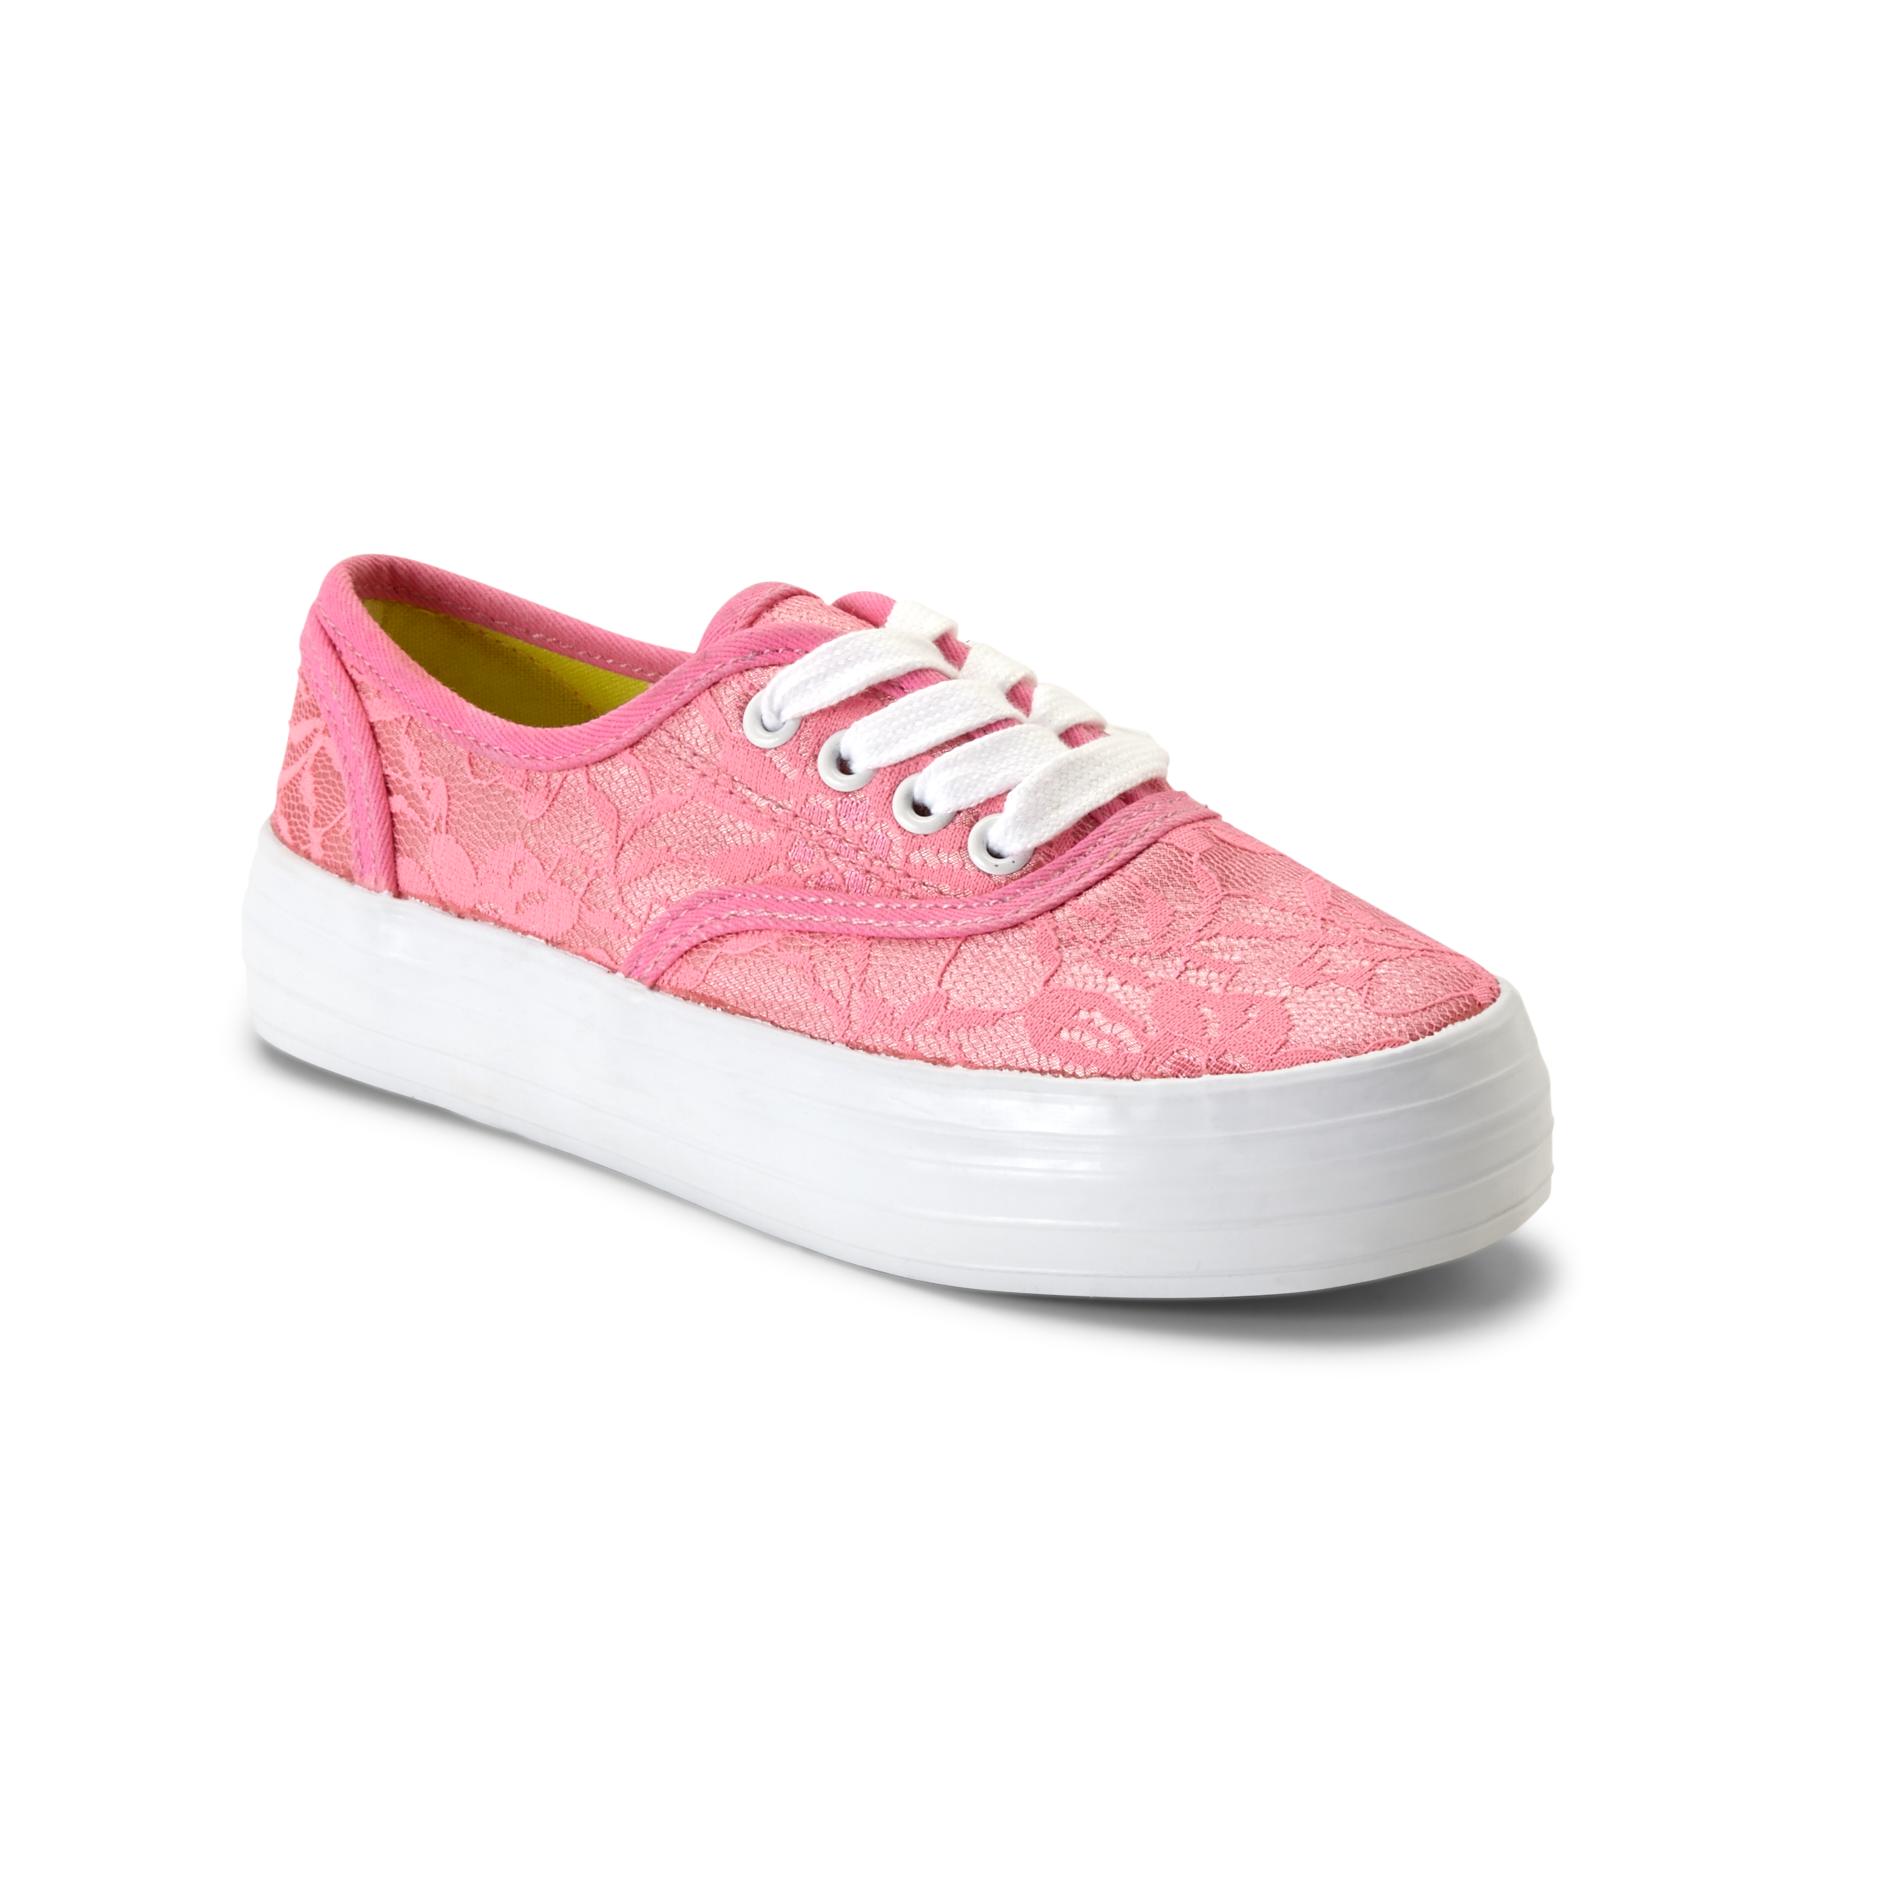 Bongo Girl's Cameo Neon Pink Canvas Sneaker - Lace